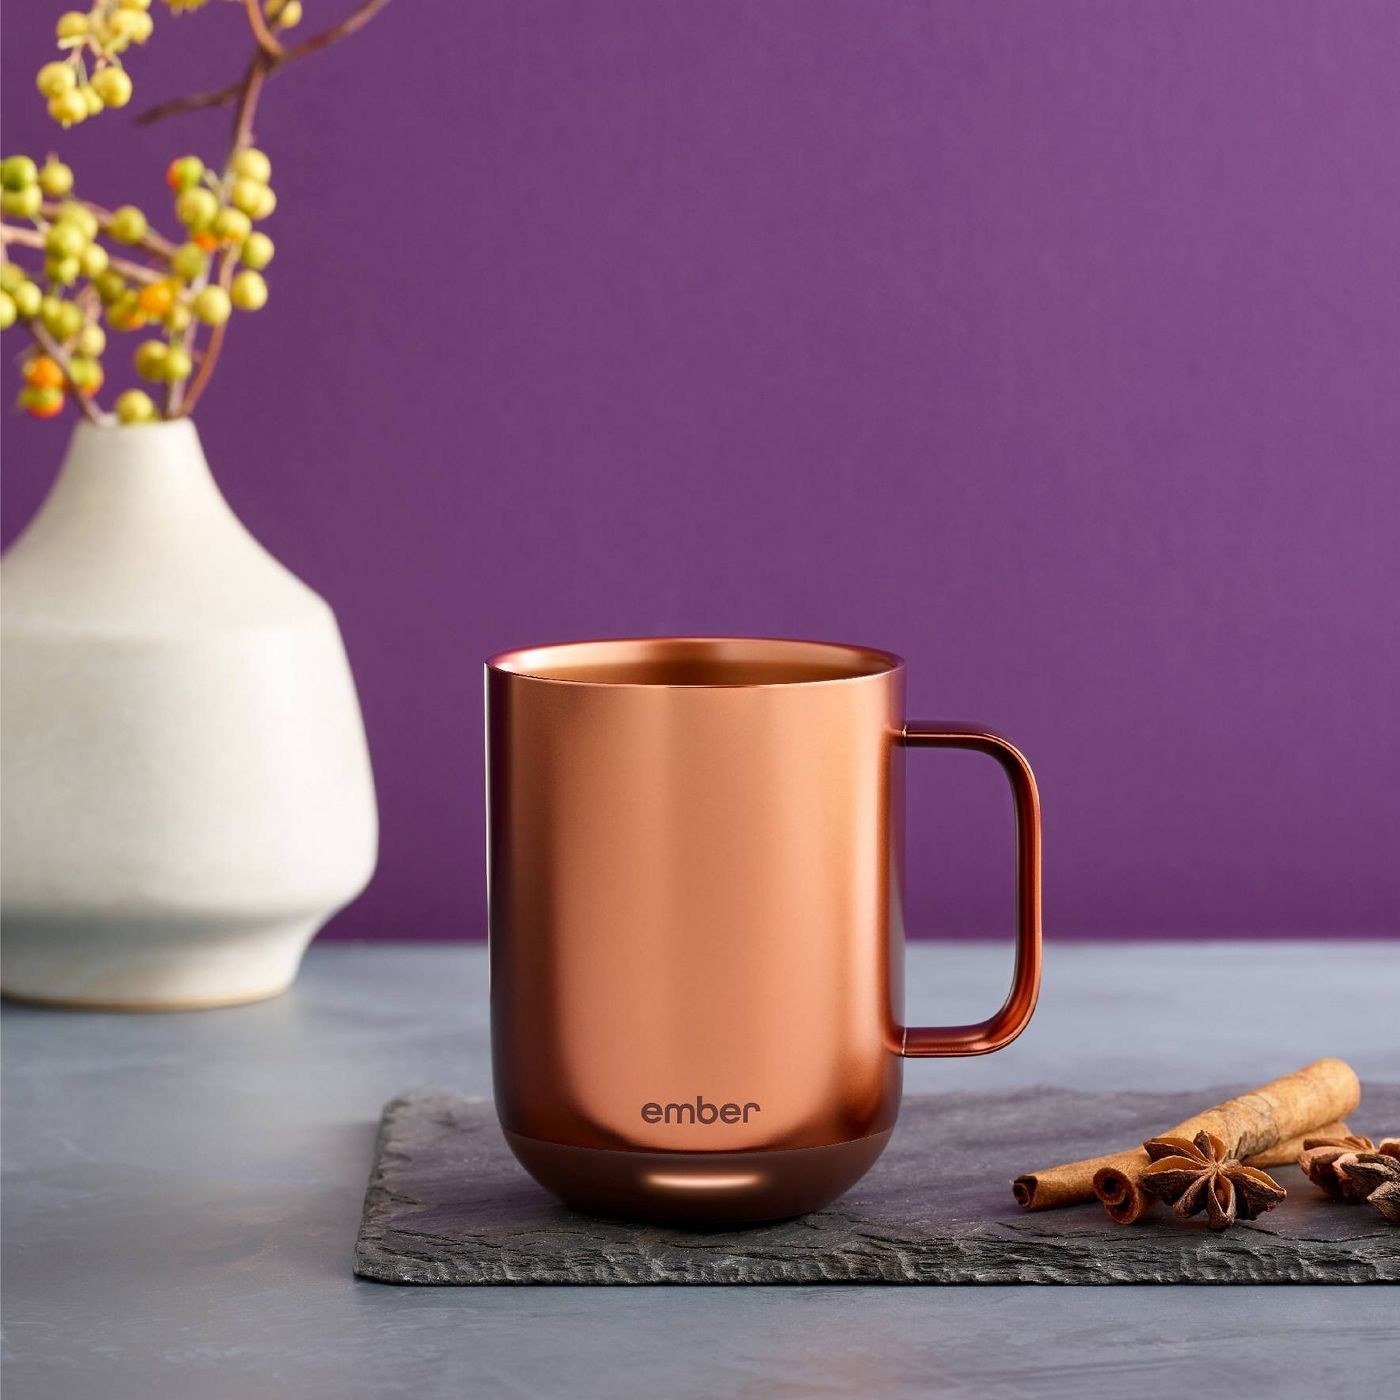 copper ember mug on a table